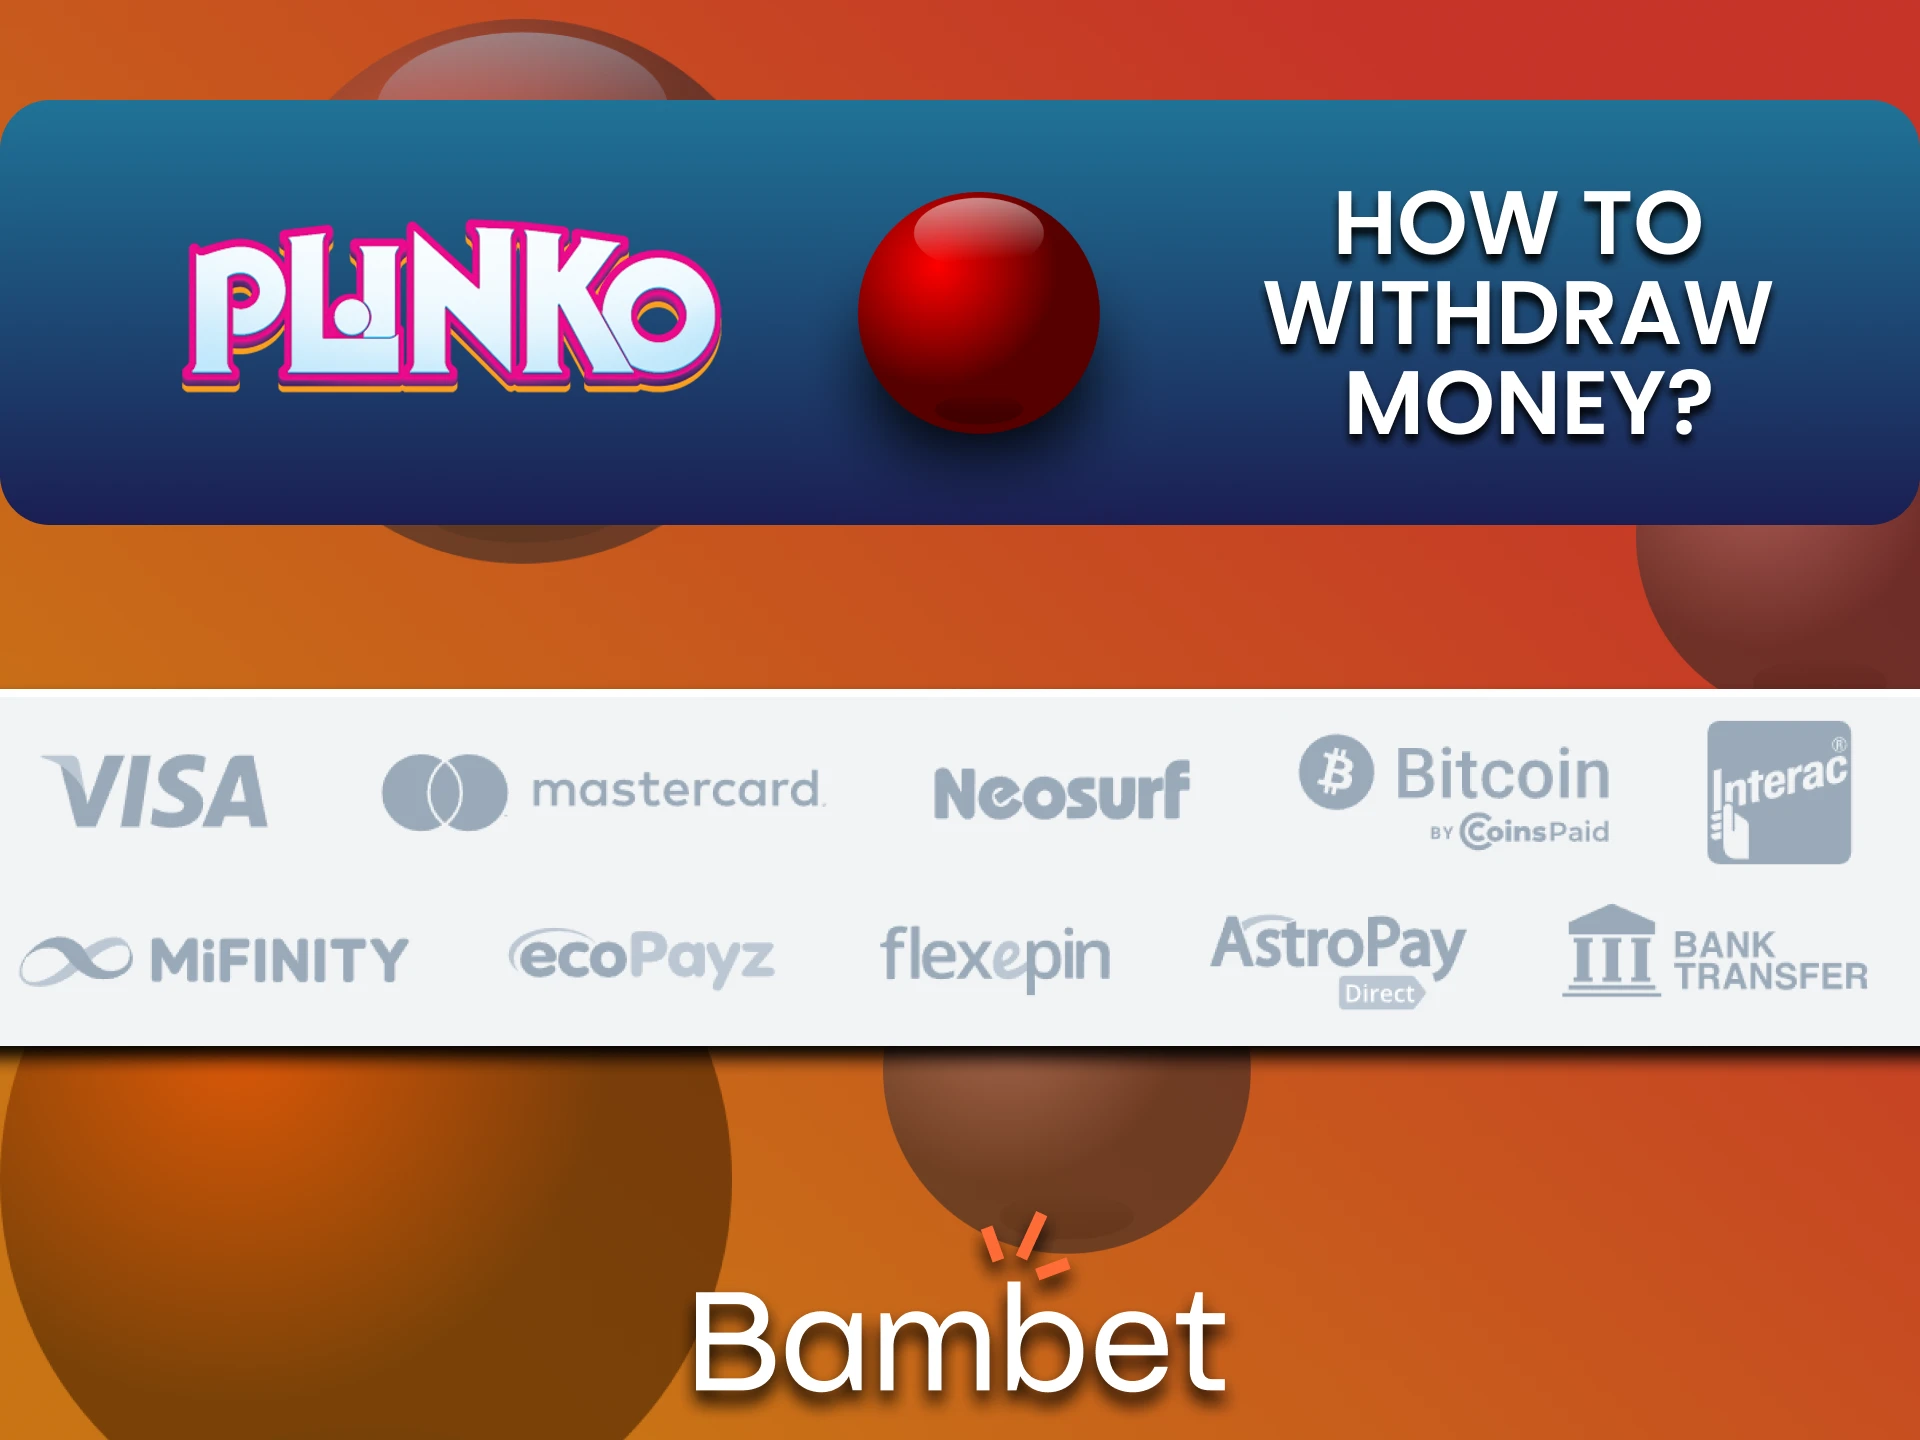 We will tell you about ways to withdraw funds on Bambet for Plinko.